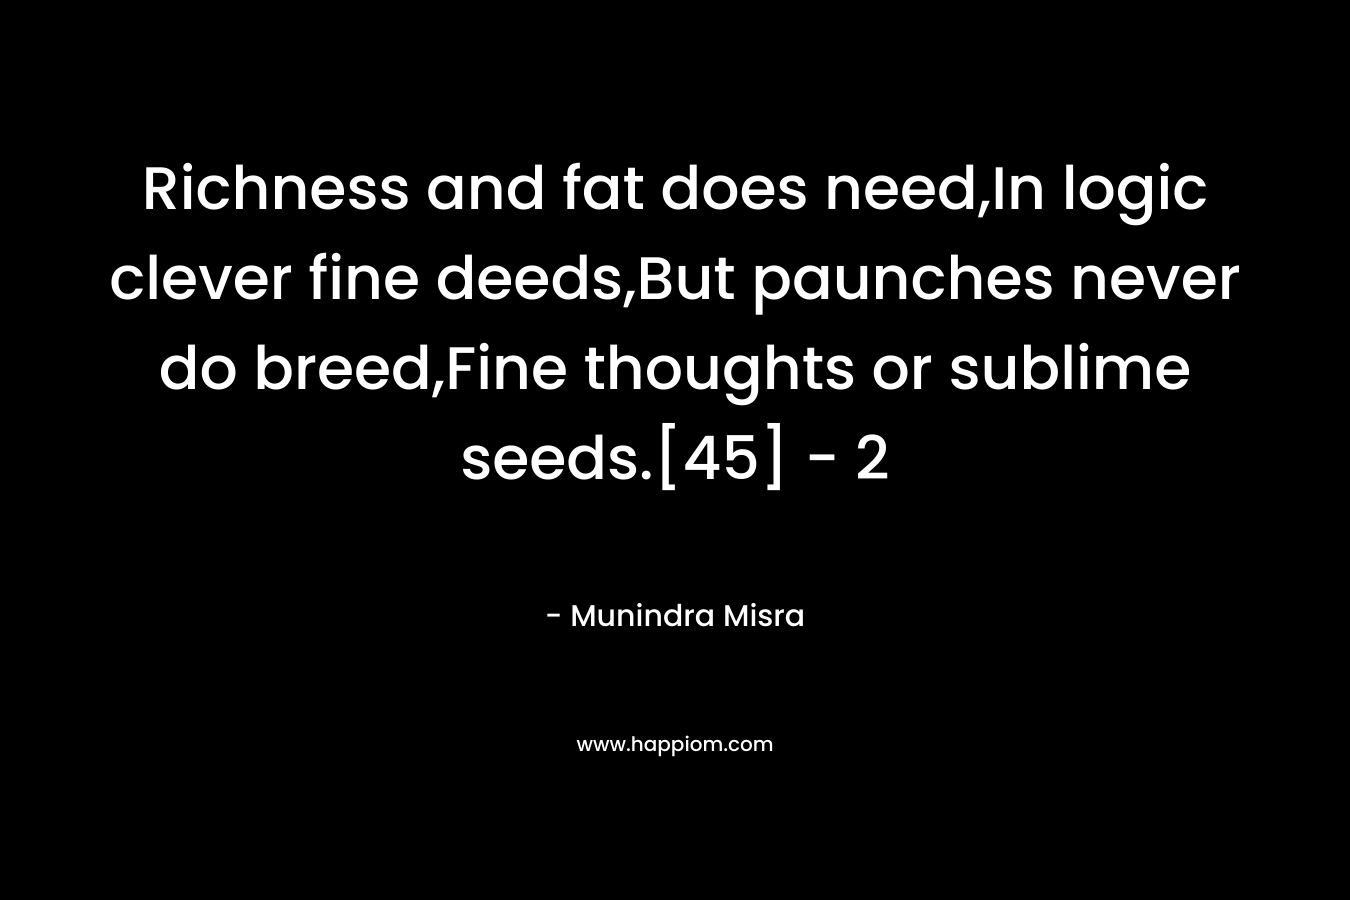 Richness and fat does need,In logic clever fine deeds,But paunches never do breed,Fine thoughts or sublime seeds.[45]	– 2 – Munindra Misra